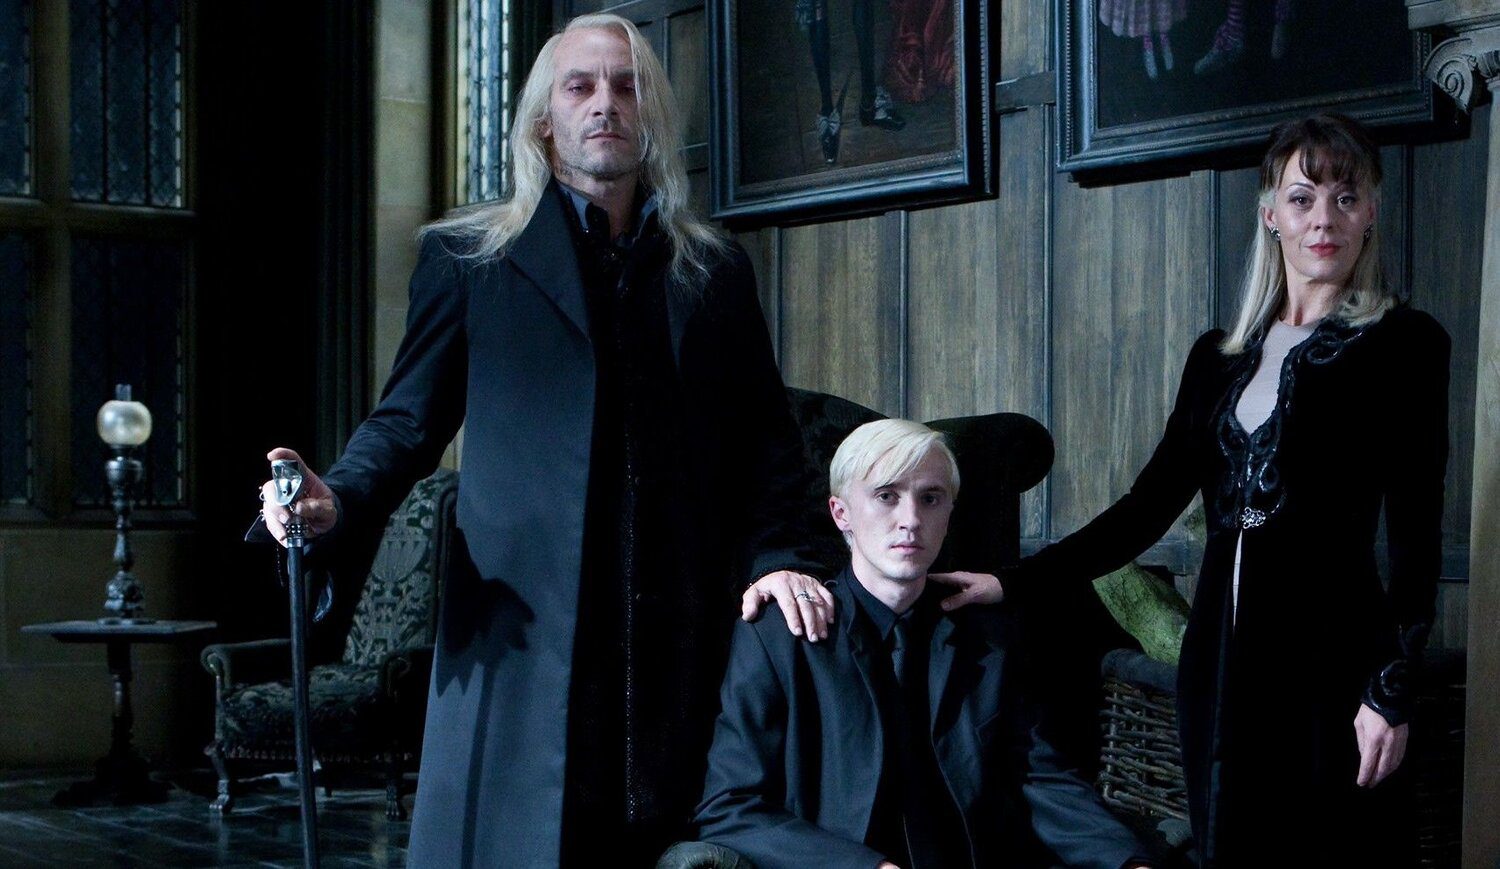 Draco Malfoy - Whom Did He Marry In The End?